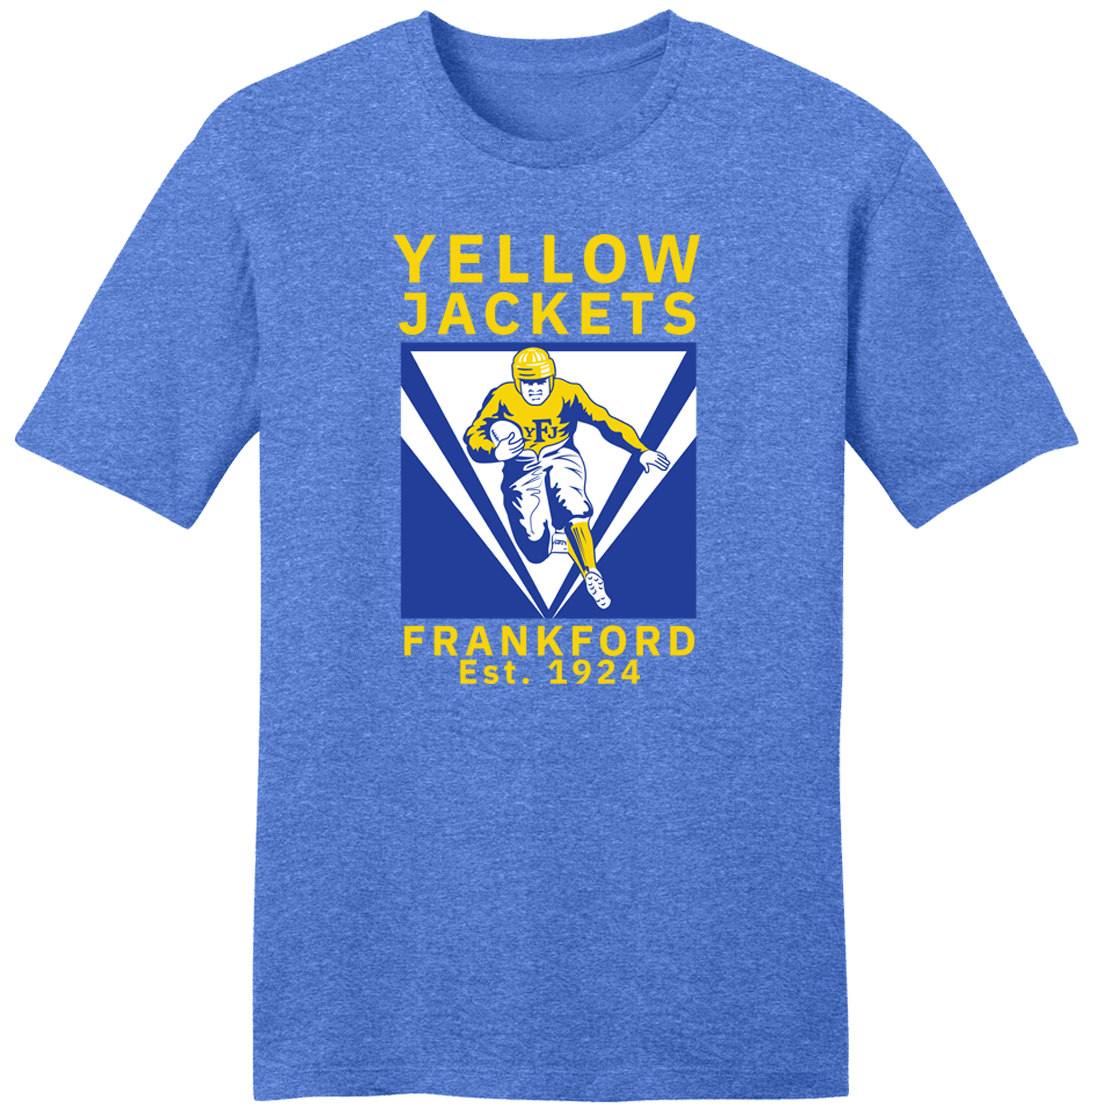 Frankford Yellow Jackets Football Apparel Store